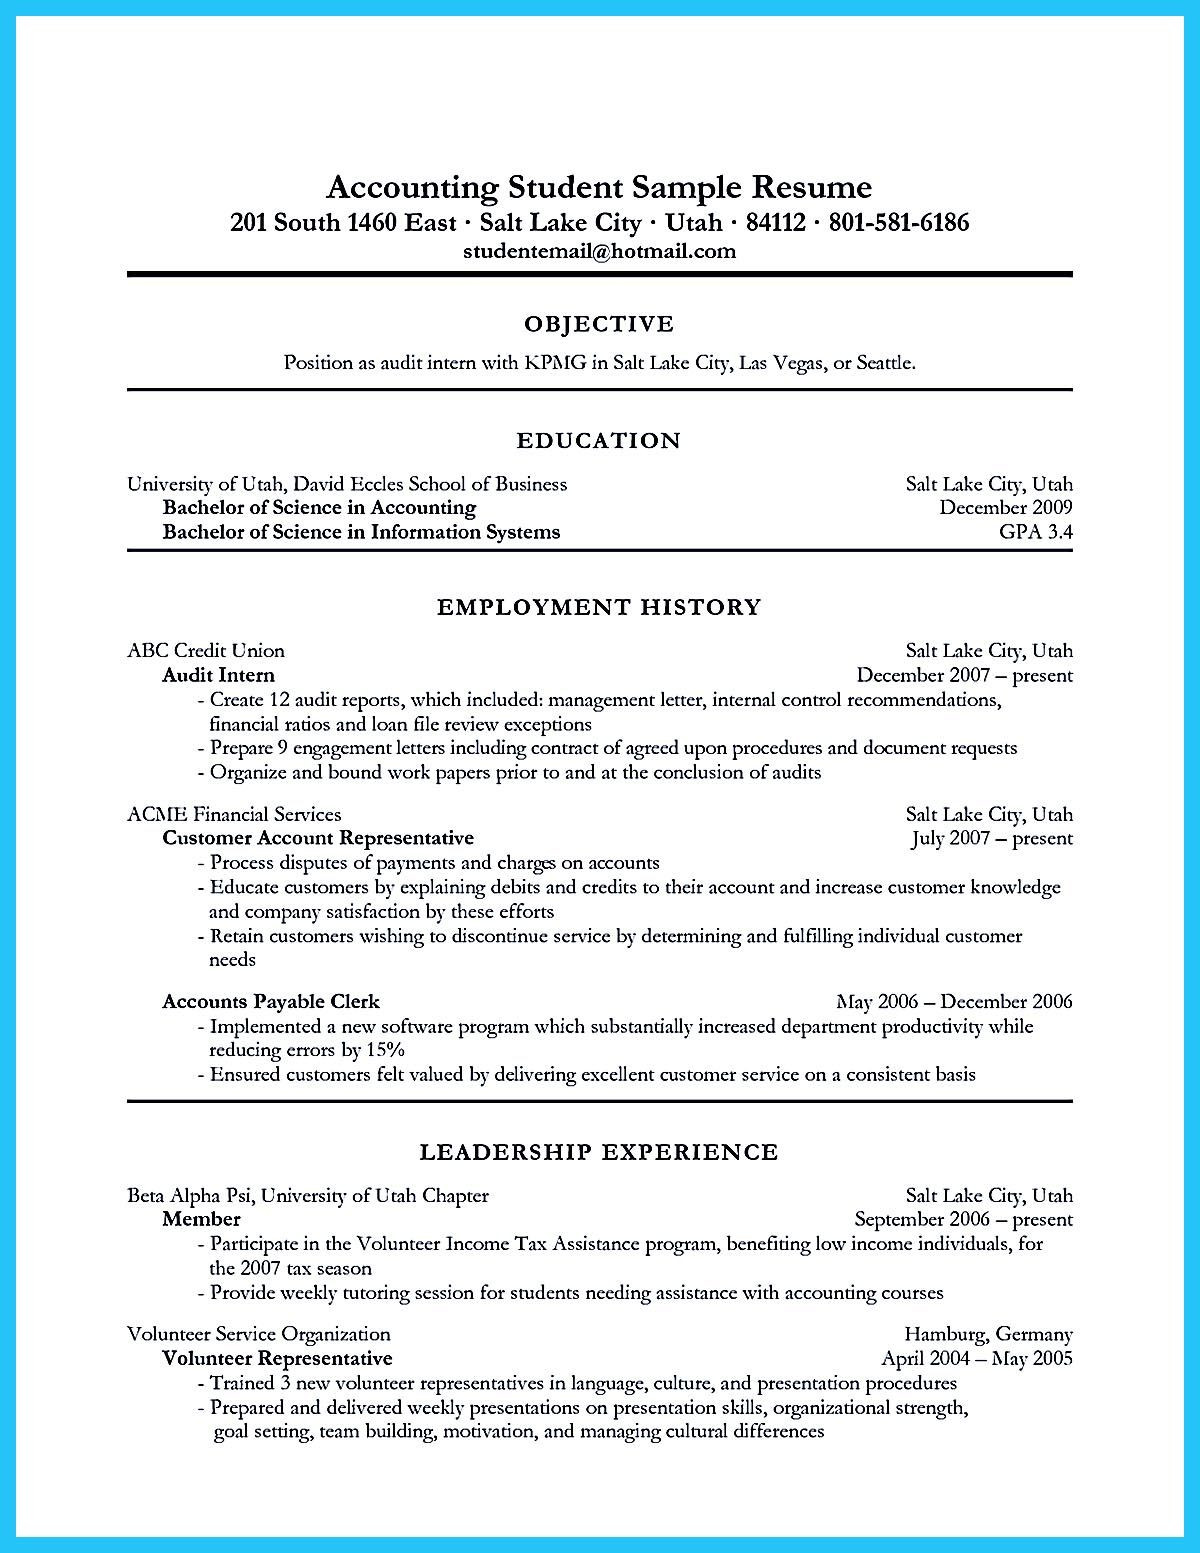 Sample Resume for Accounting Position with No Experience Accounting Student Resume Here Presents How the Resume Of …